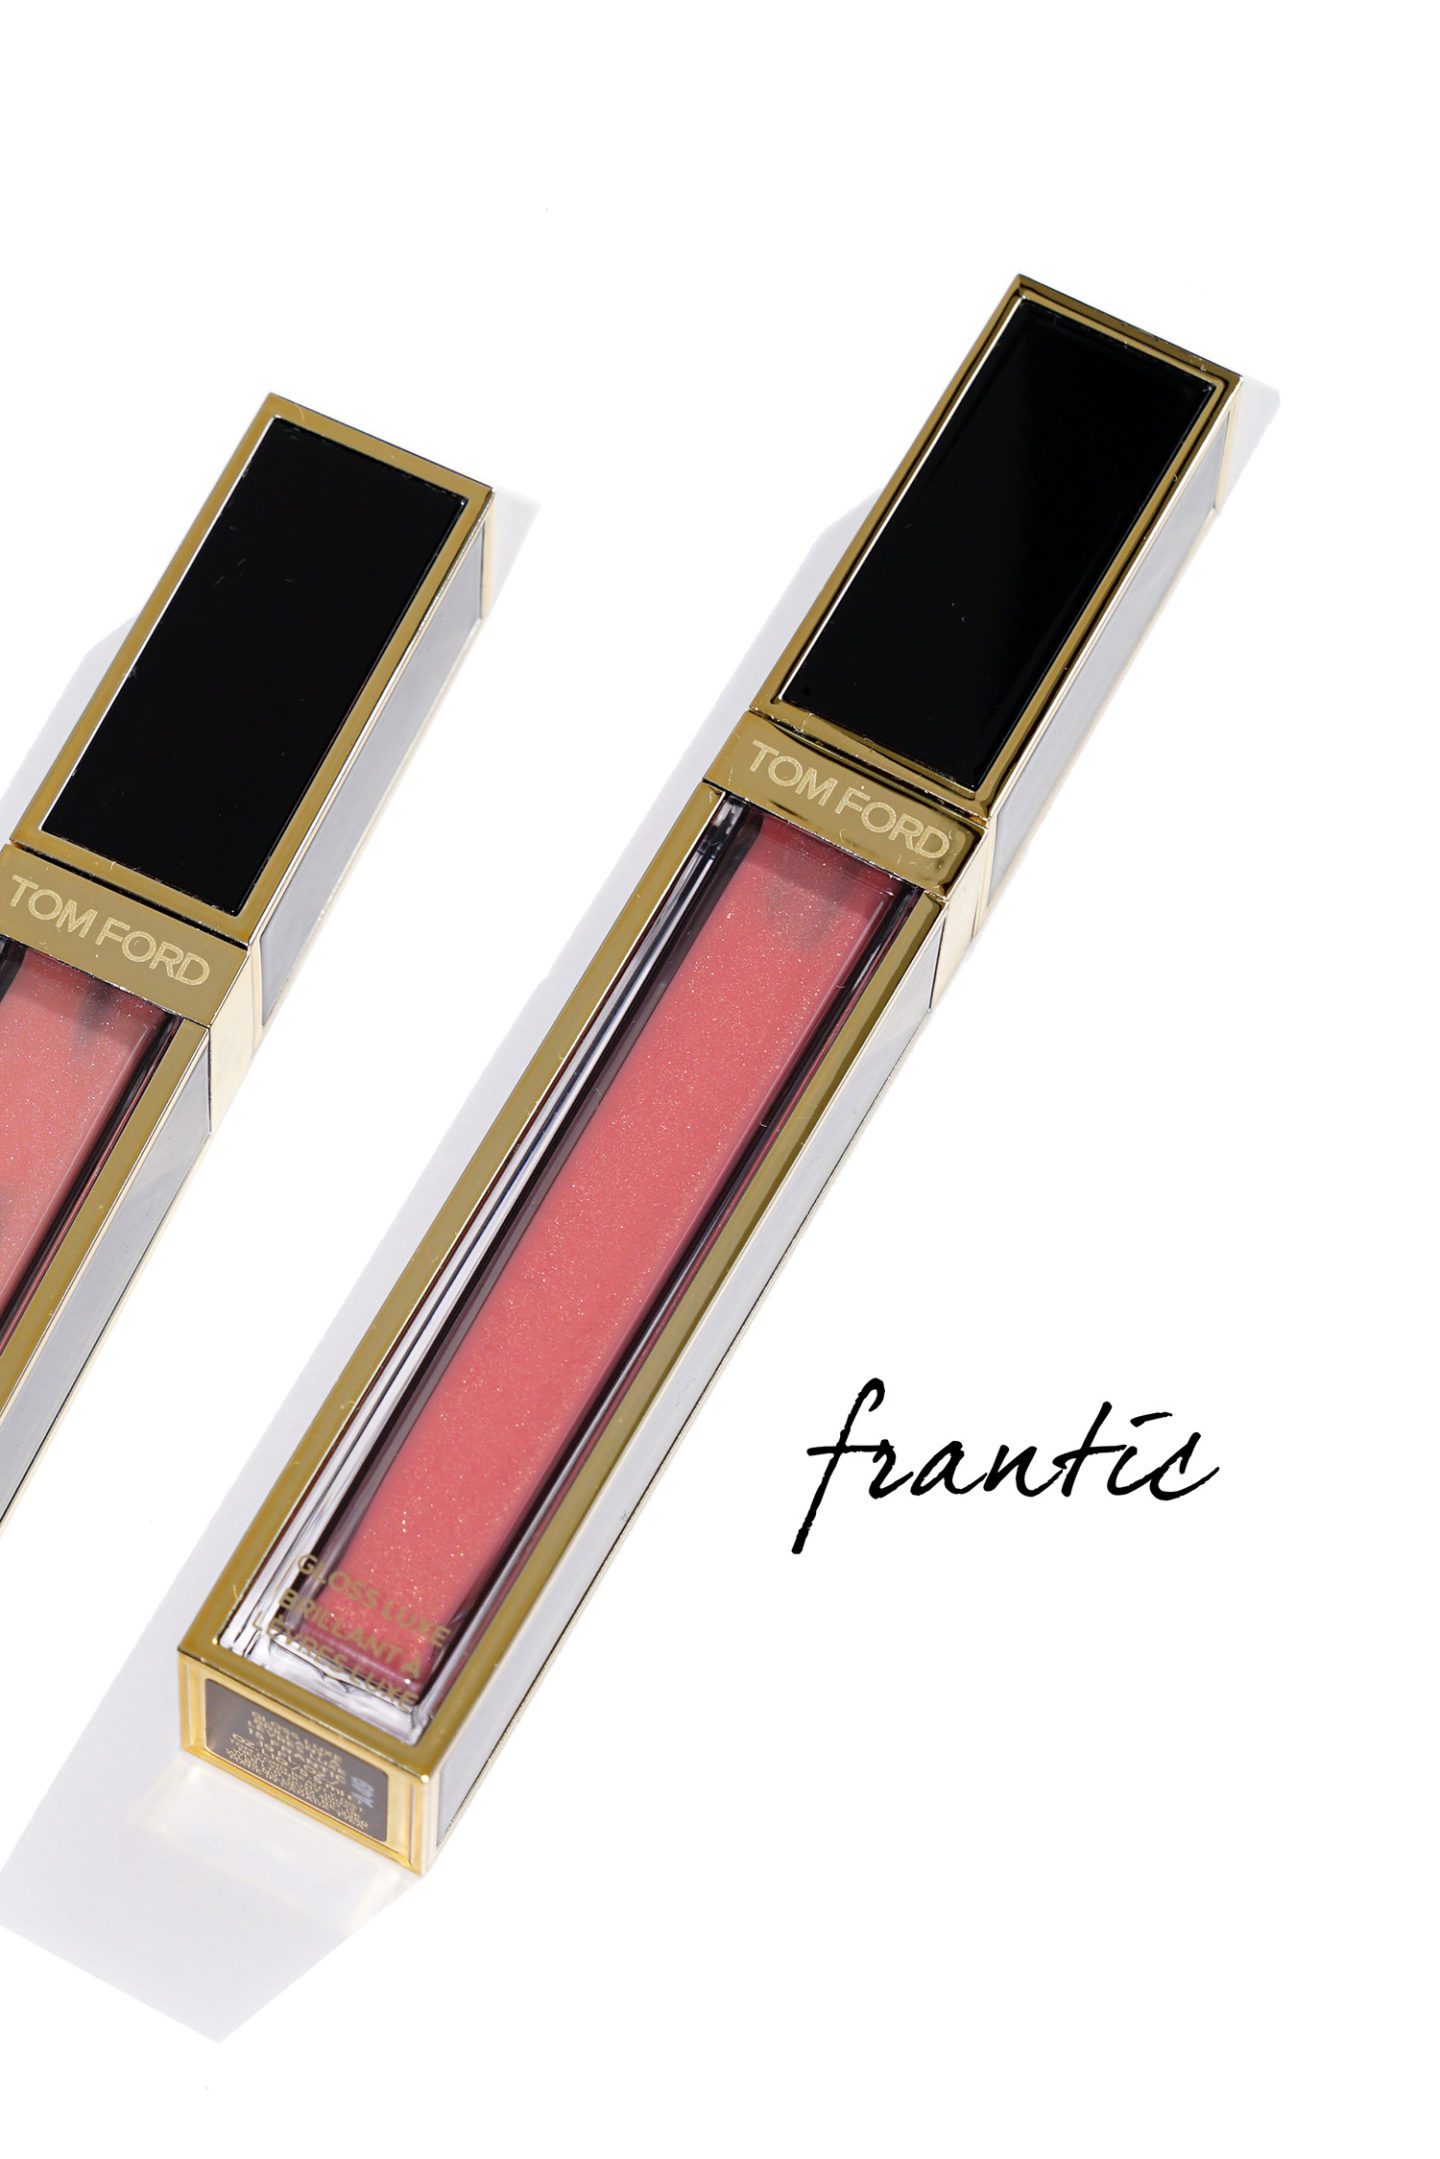 Tom Ford Gloss Luxe Frantic